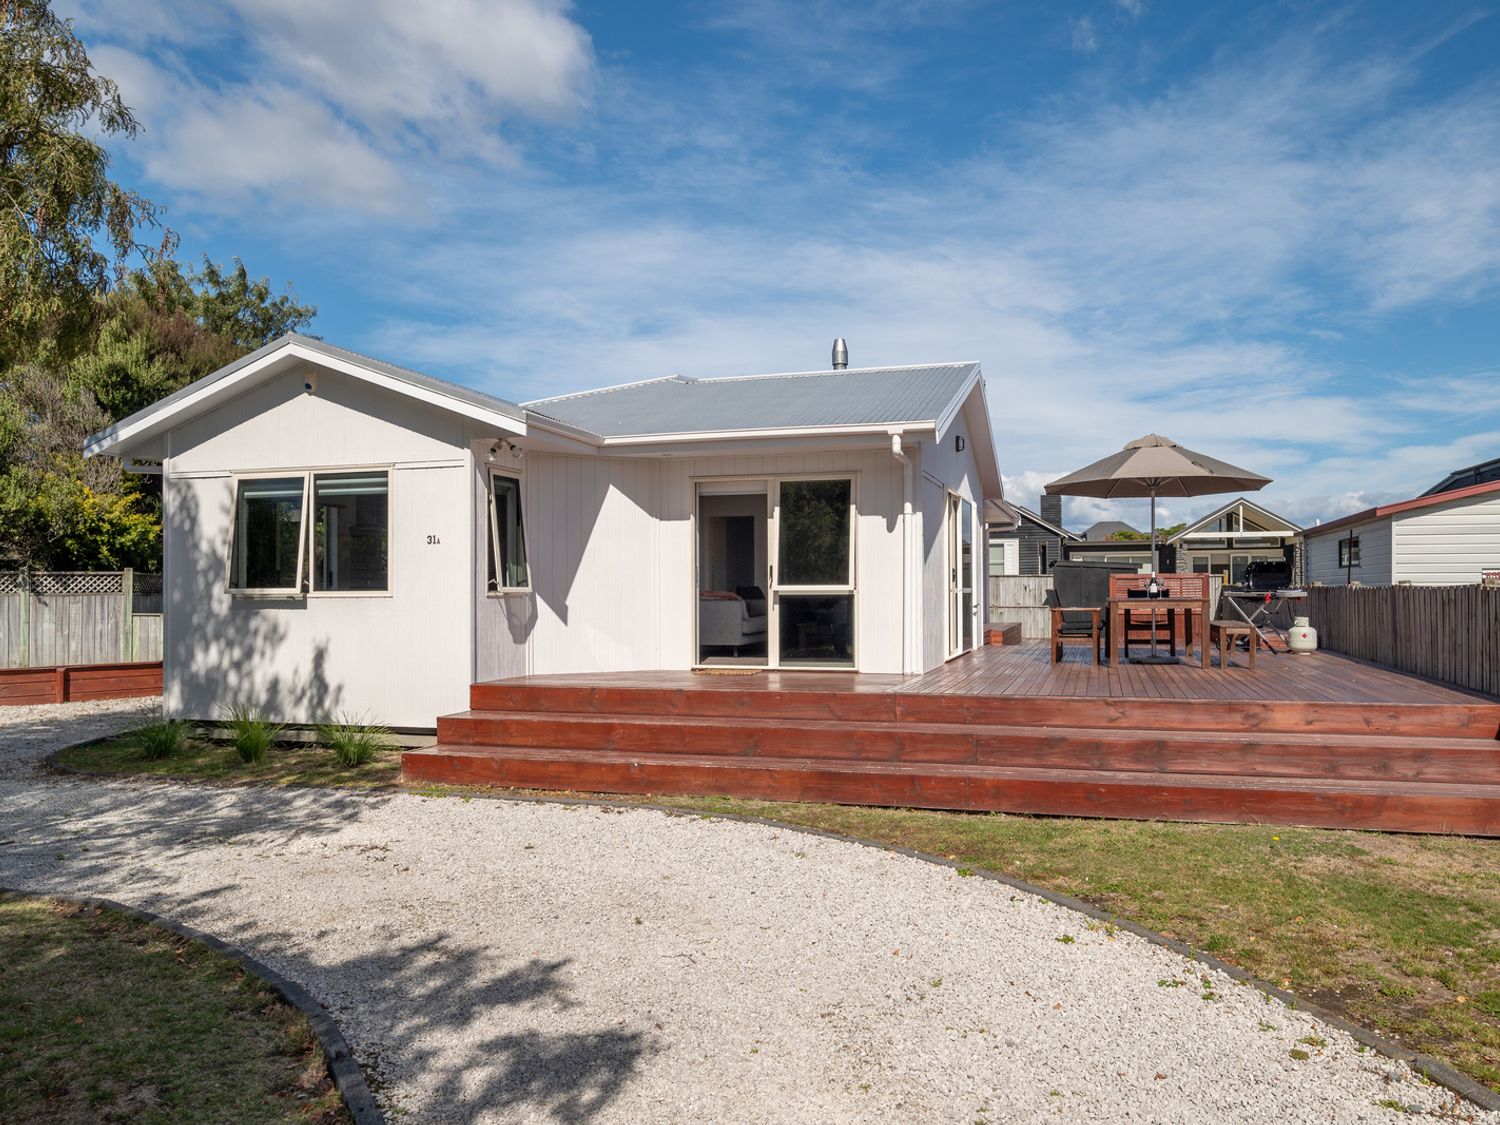 Lakeside Haven - Taupo Holiday Home -  - 1139704 - photo 1